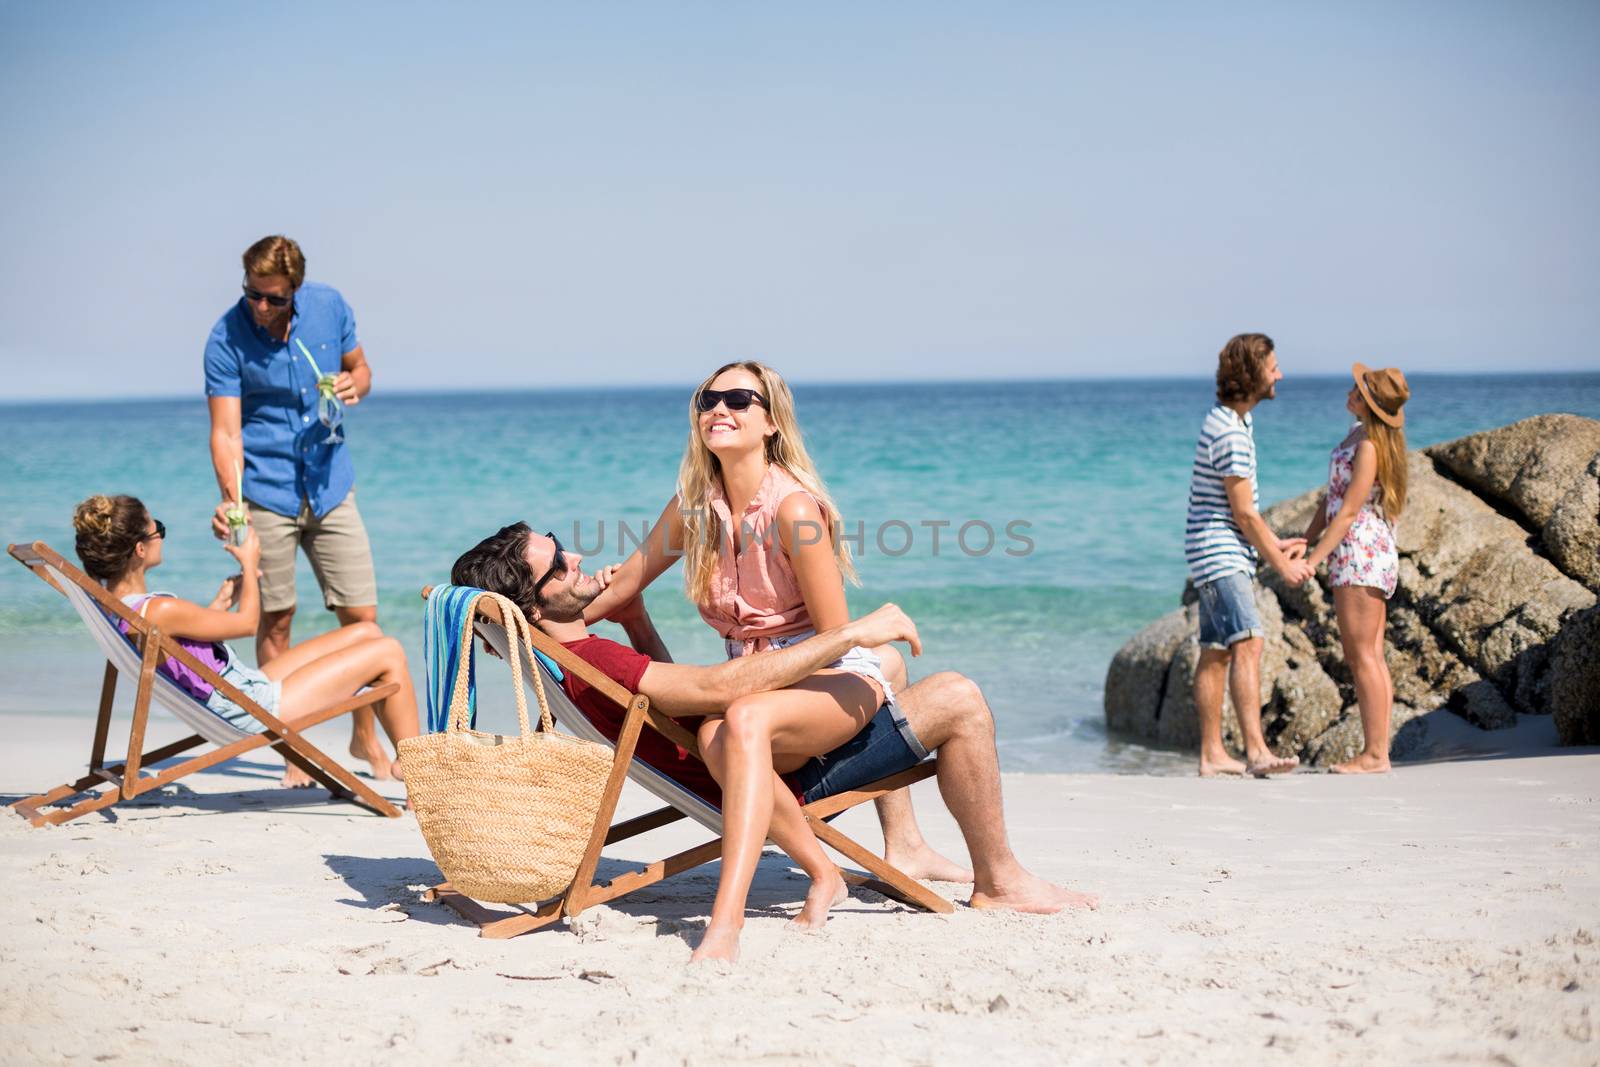 Romantic couples on shore at beach during sunny day